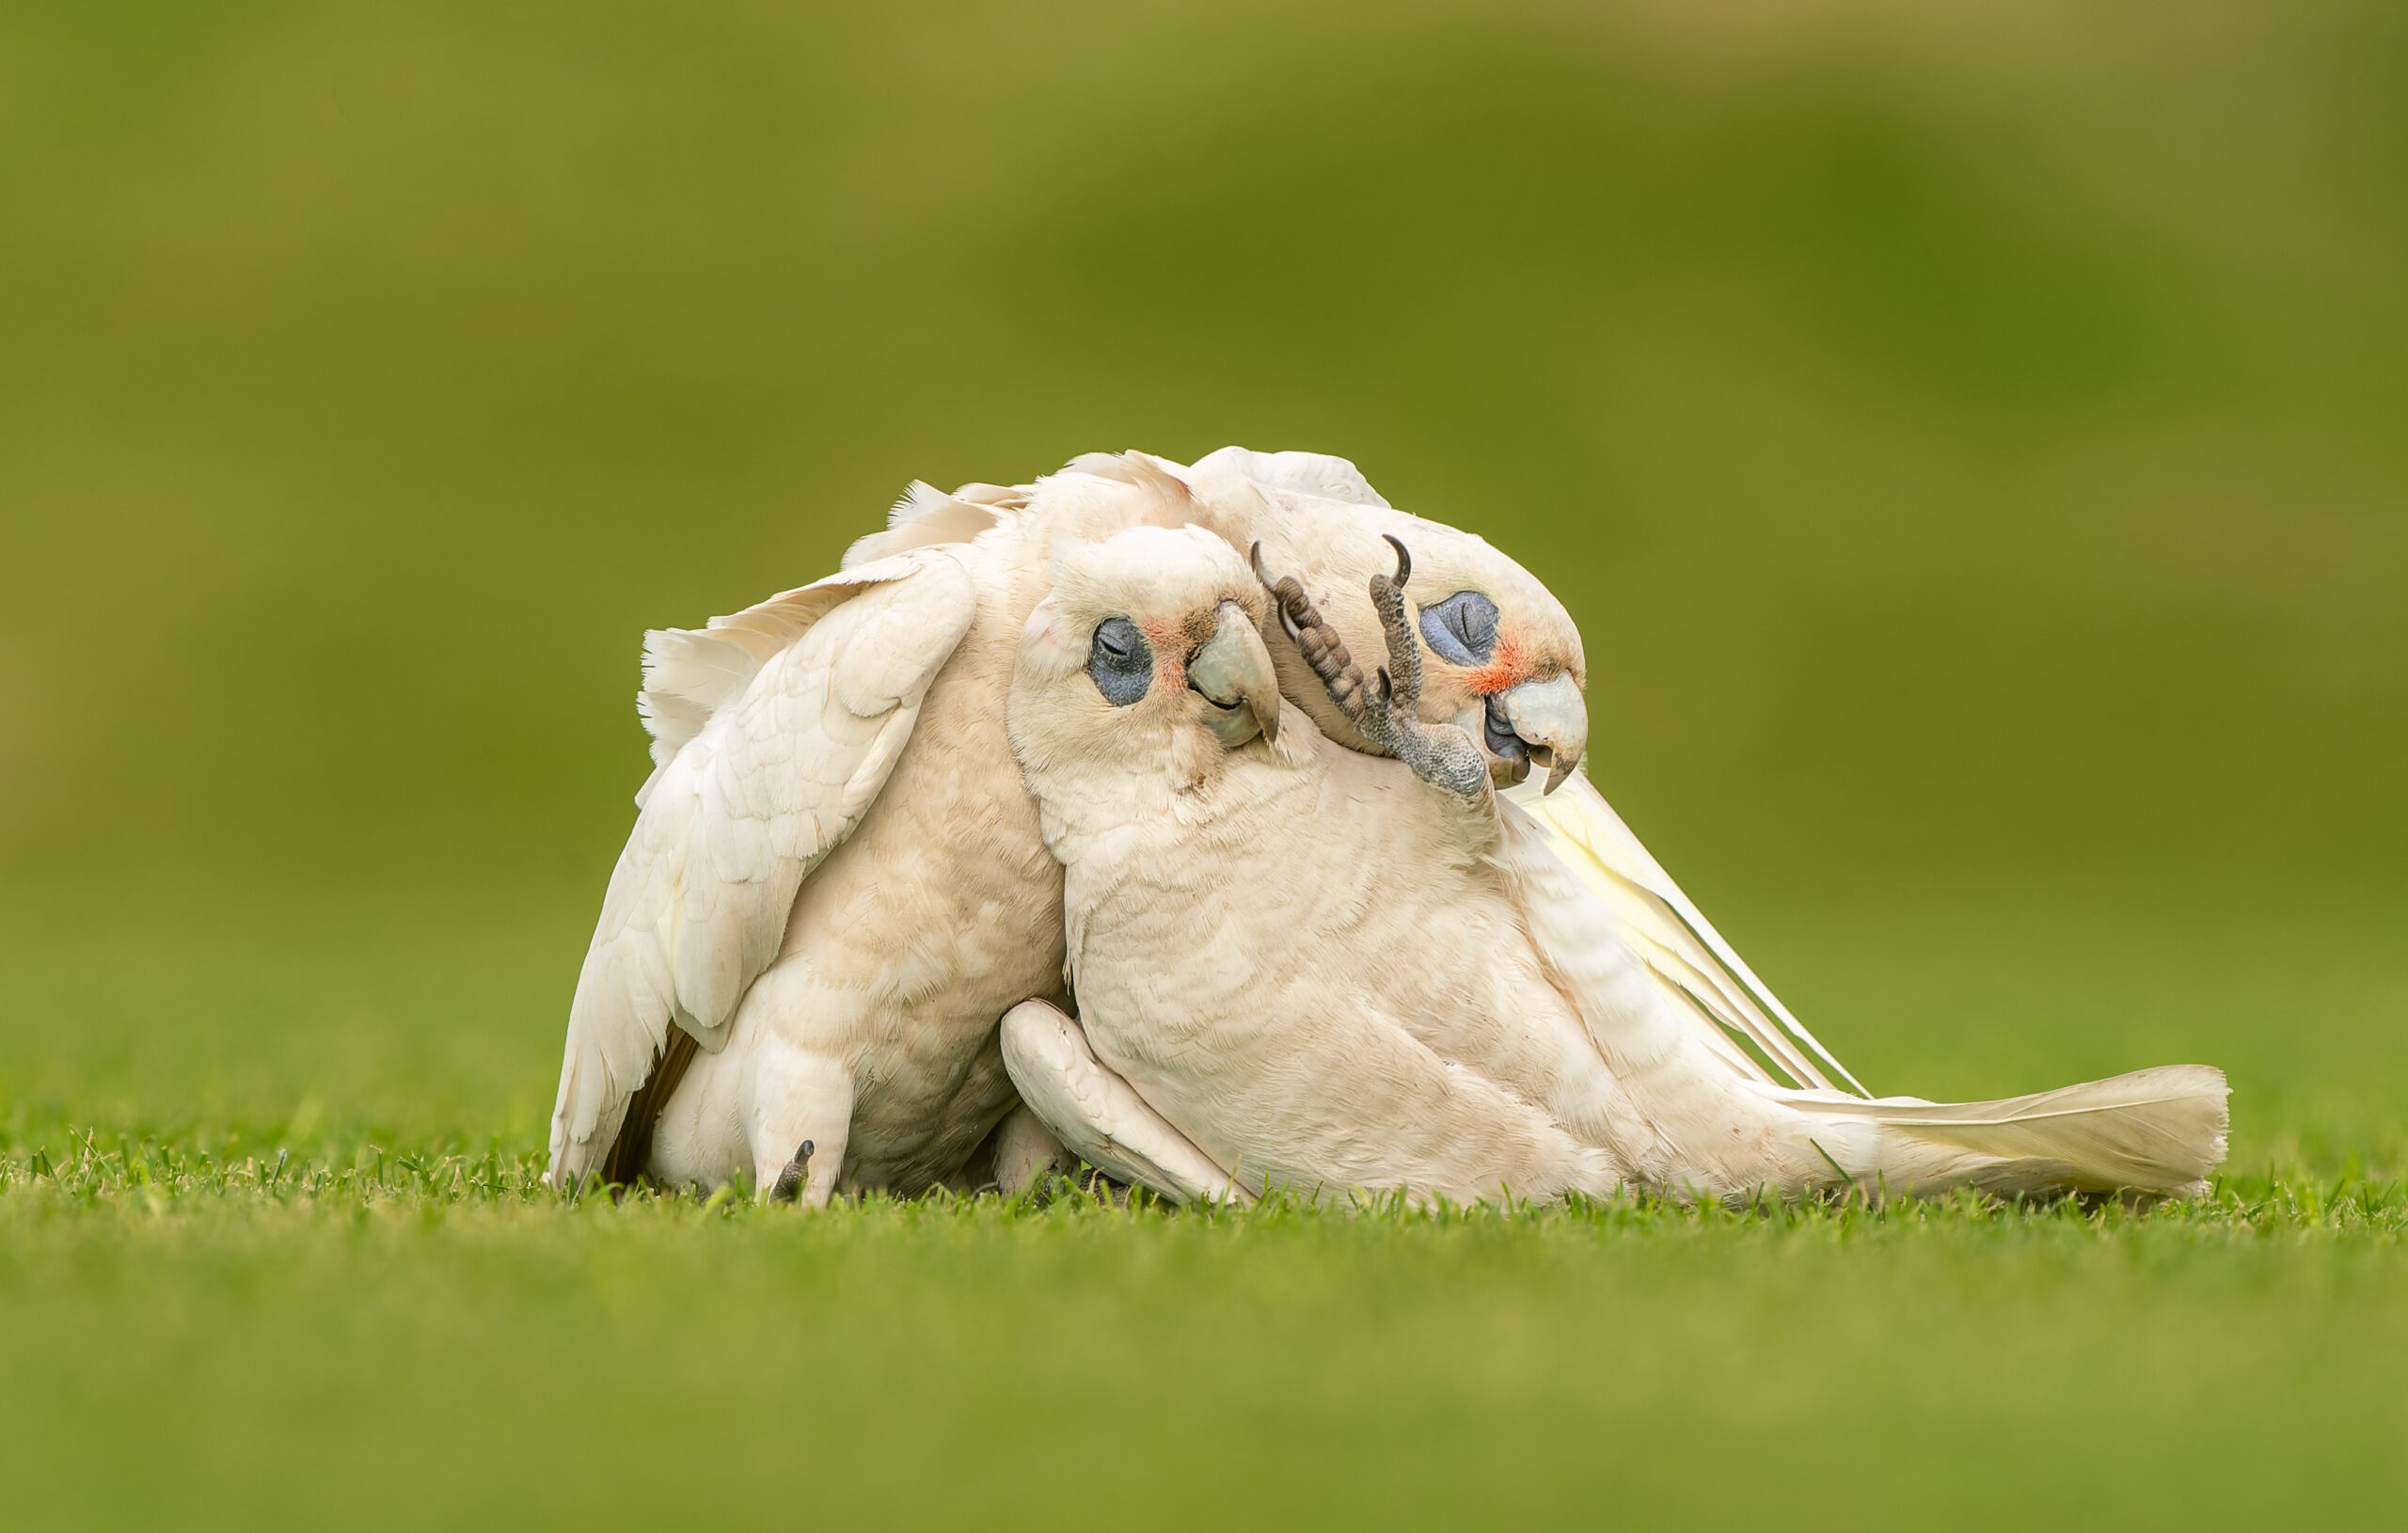 In the middle of the frame, two Little Corellas are playing in the grass with eyes closed as though embracing. The bird on the right is lying on its side, claw outstretched, while the other rests its head on its wing.